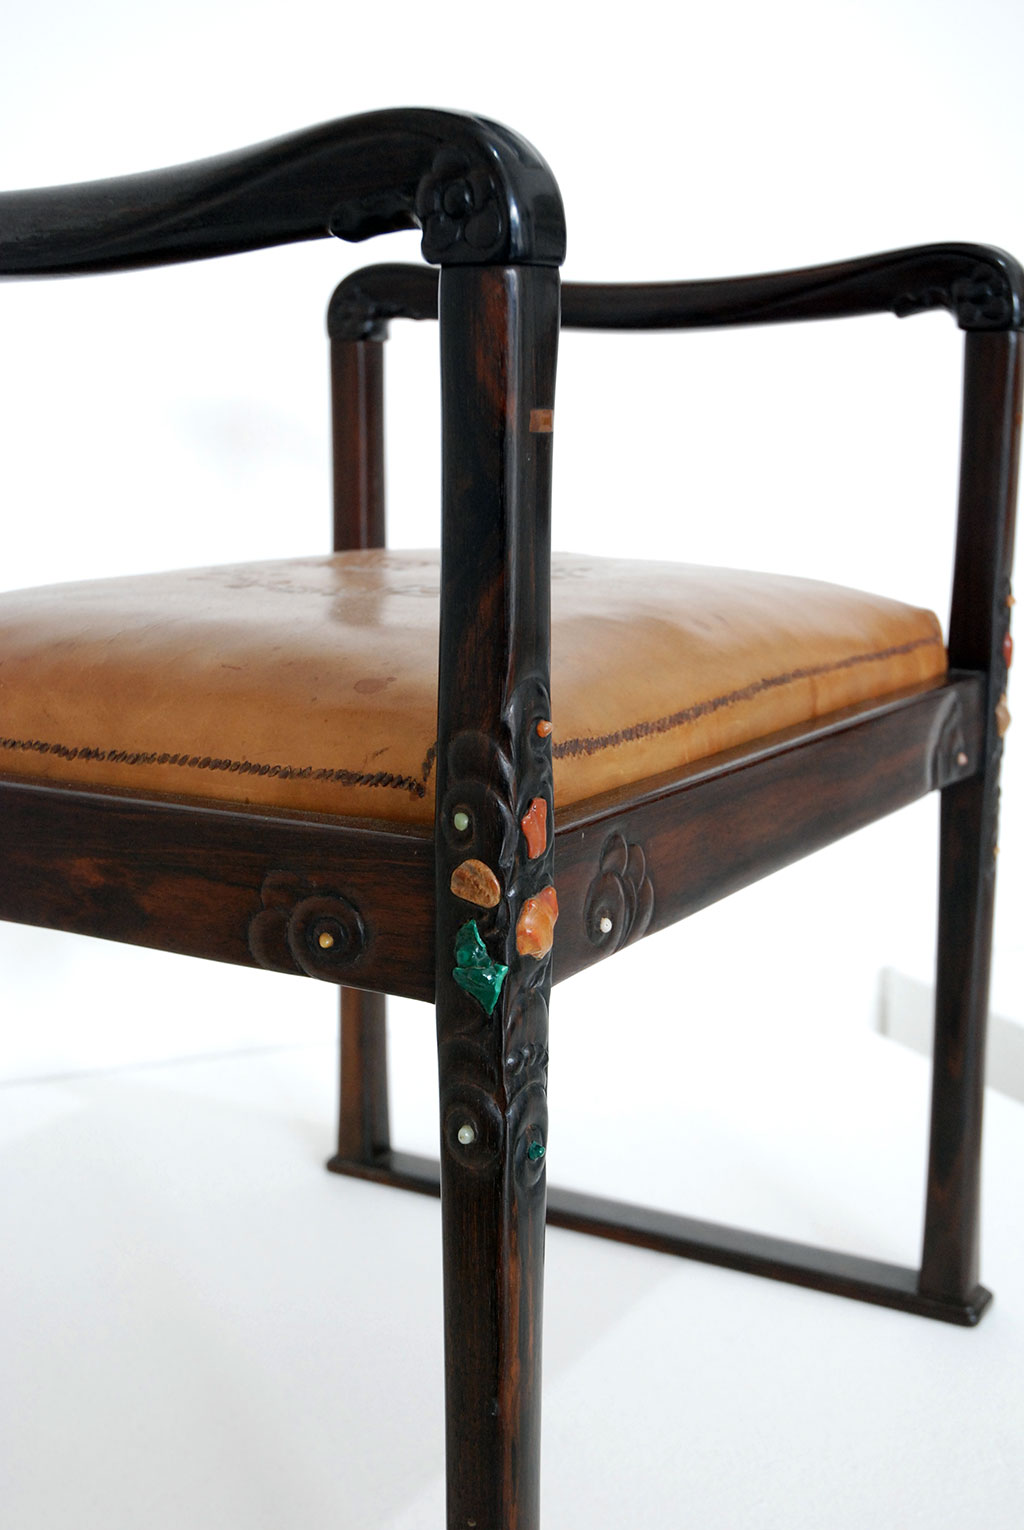 Charles Greene, Footstool, detail, ca. 1930, Rooted Claifornia